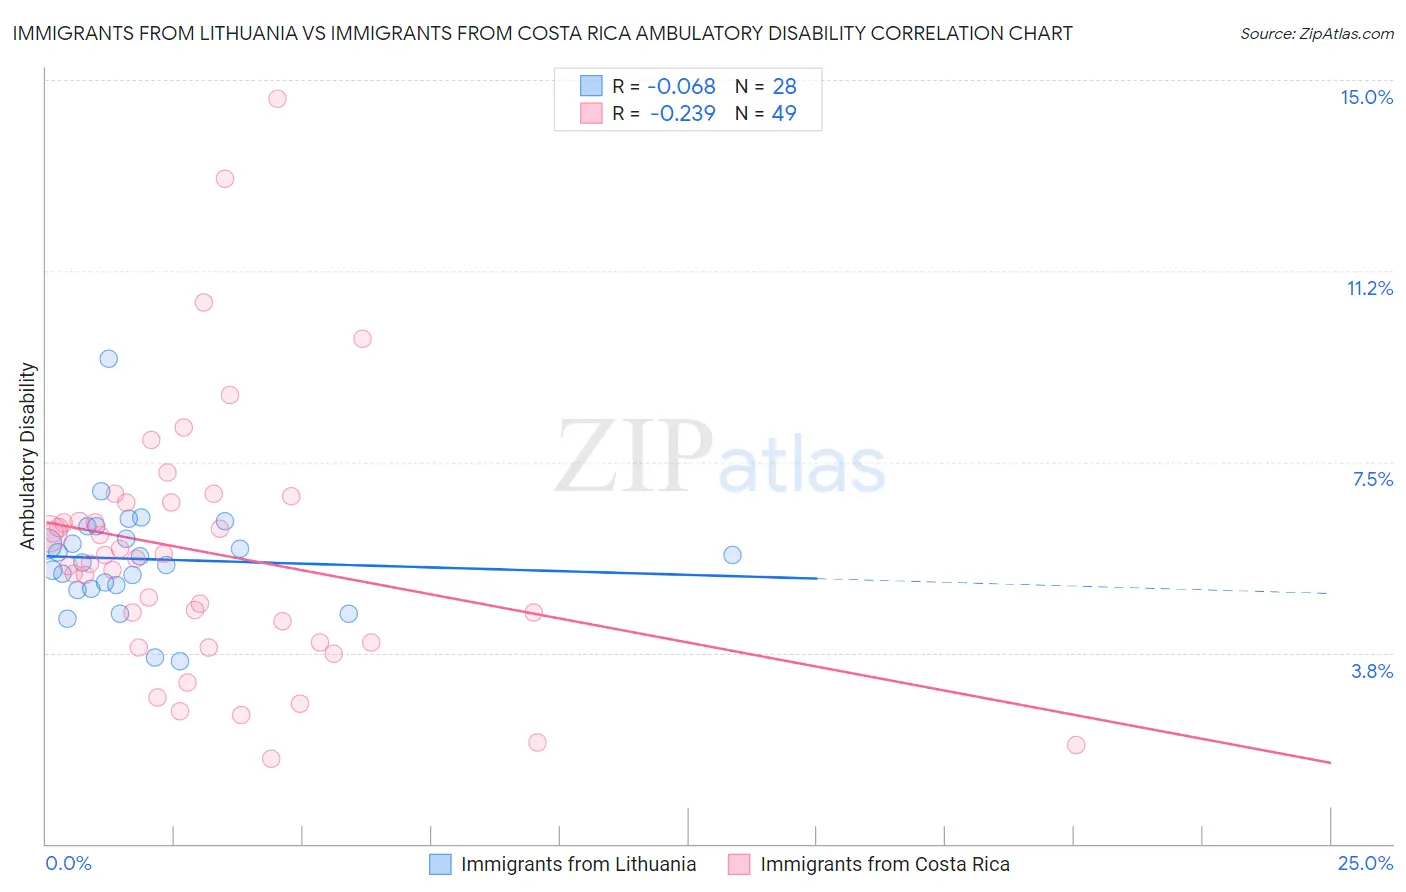 Immigrants from Lithuania vs Immigrants from Costa Rica Ambulatory Disability